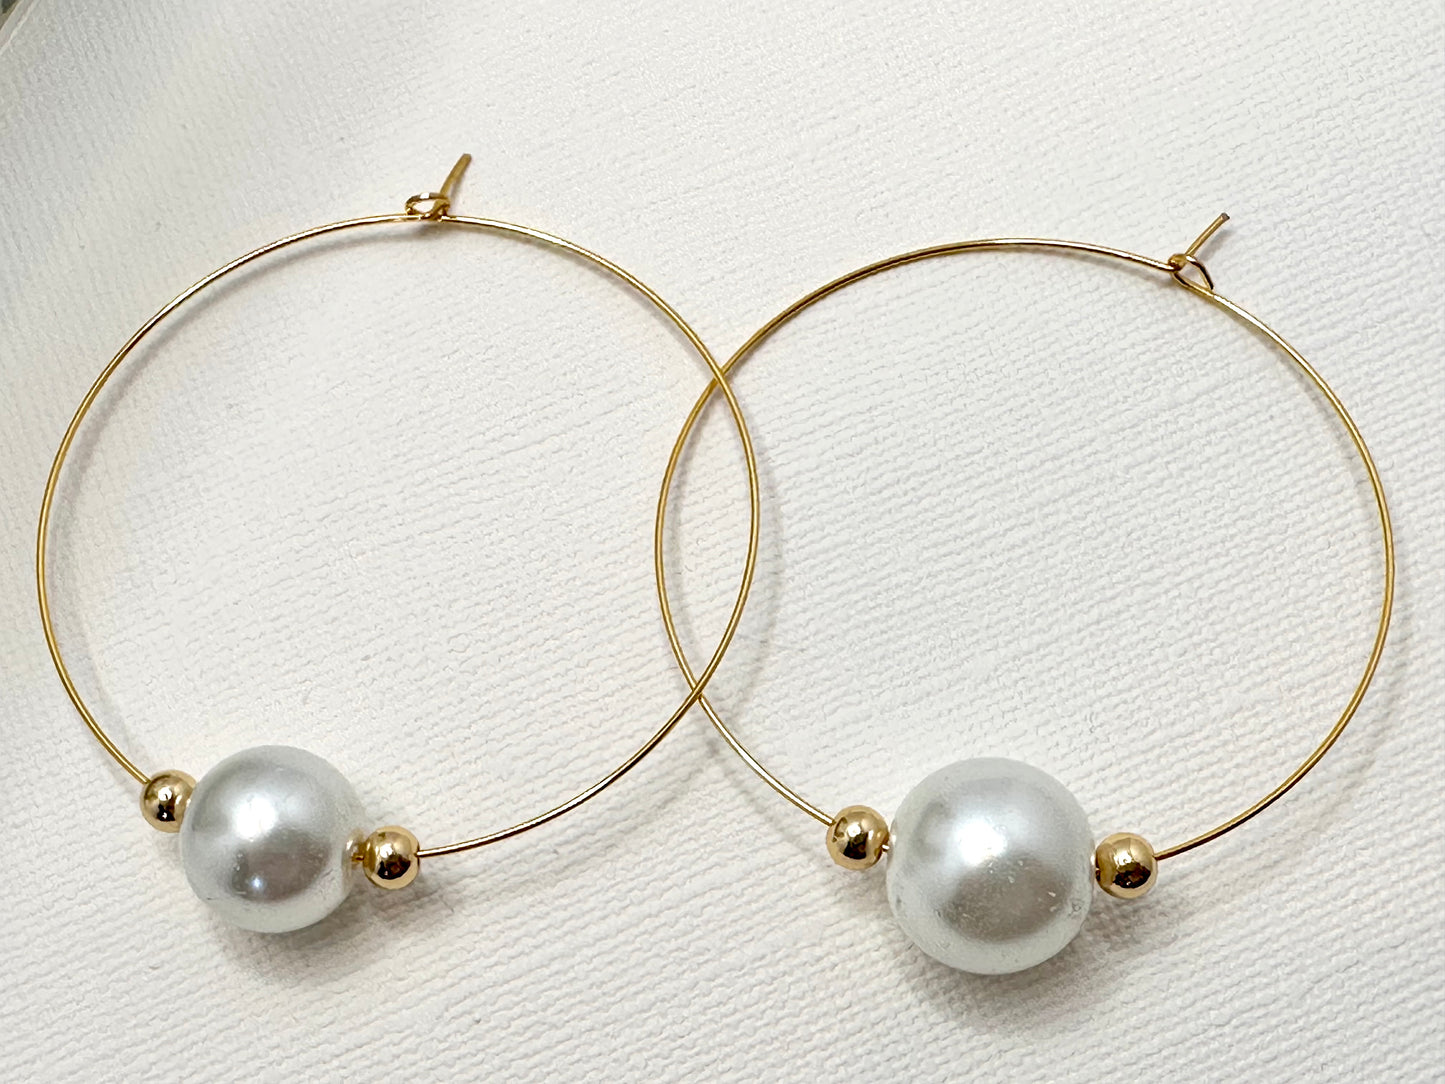 Large White and Gold Hoop Earrings